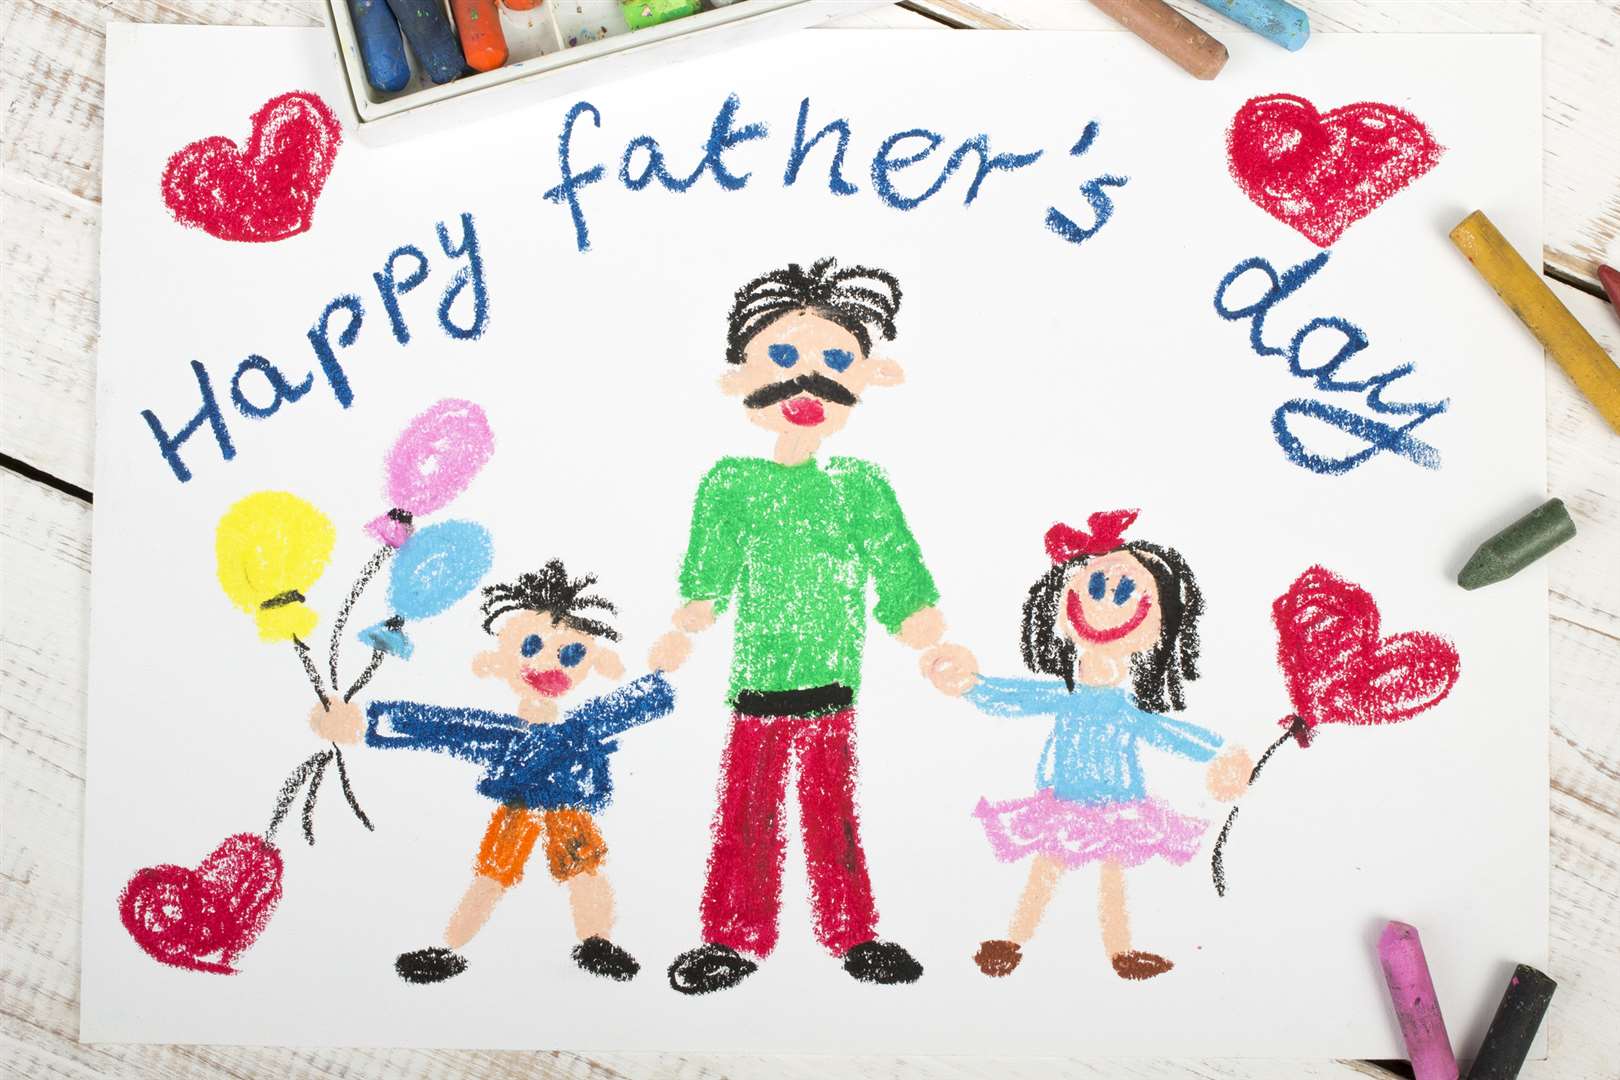 Father's Day is on Sunday, June 18